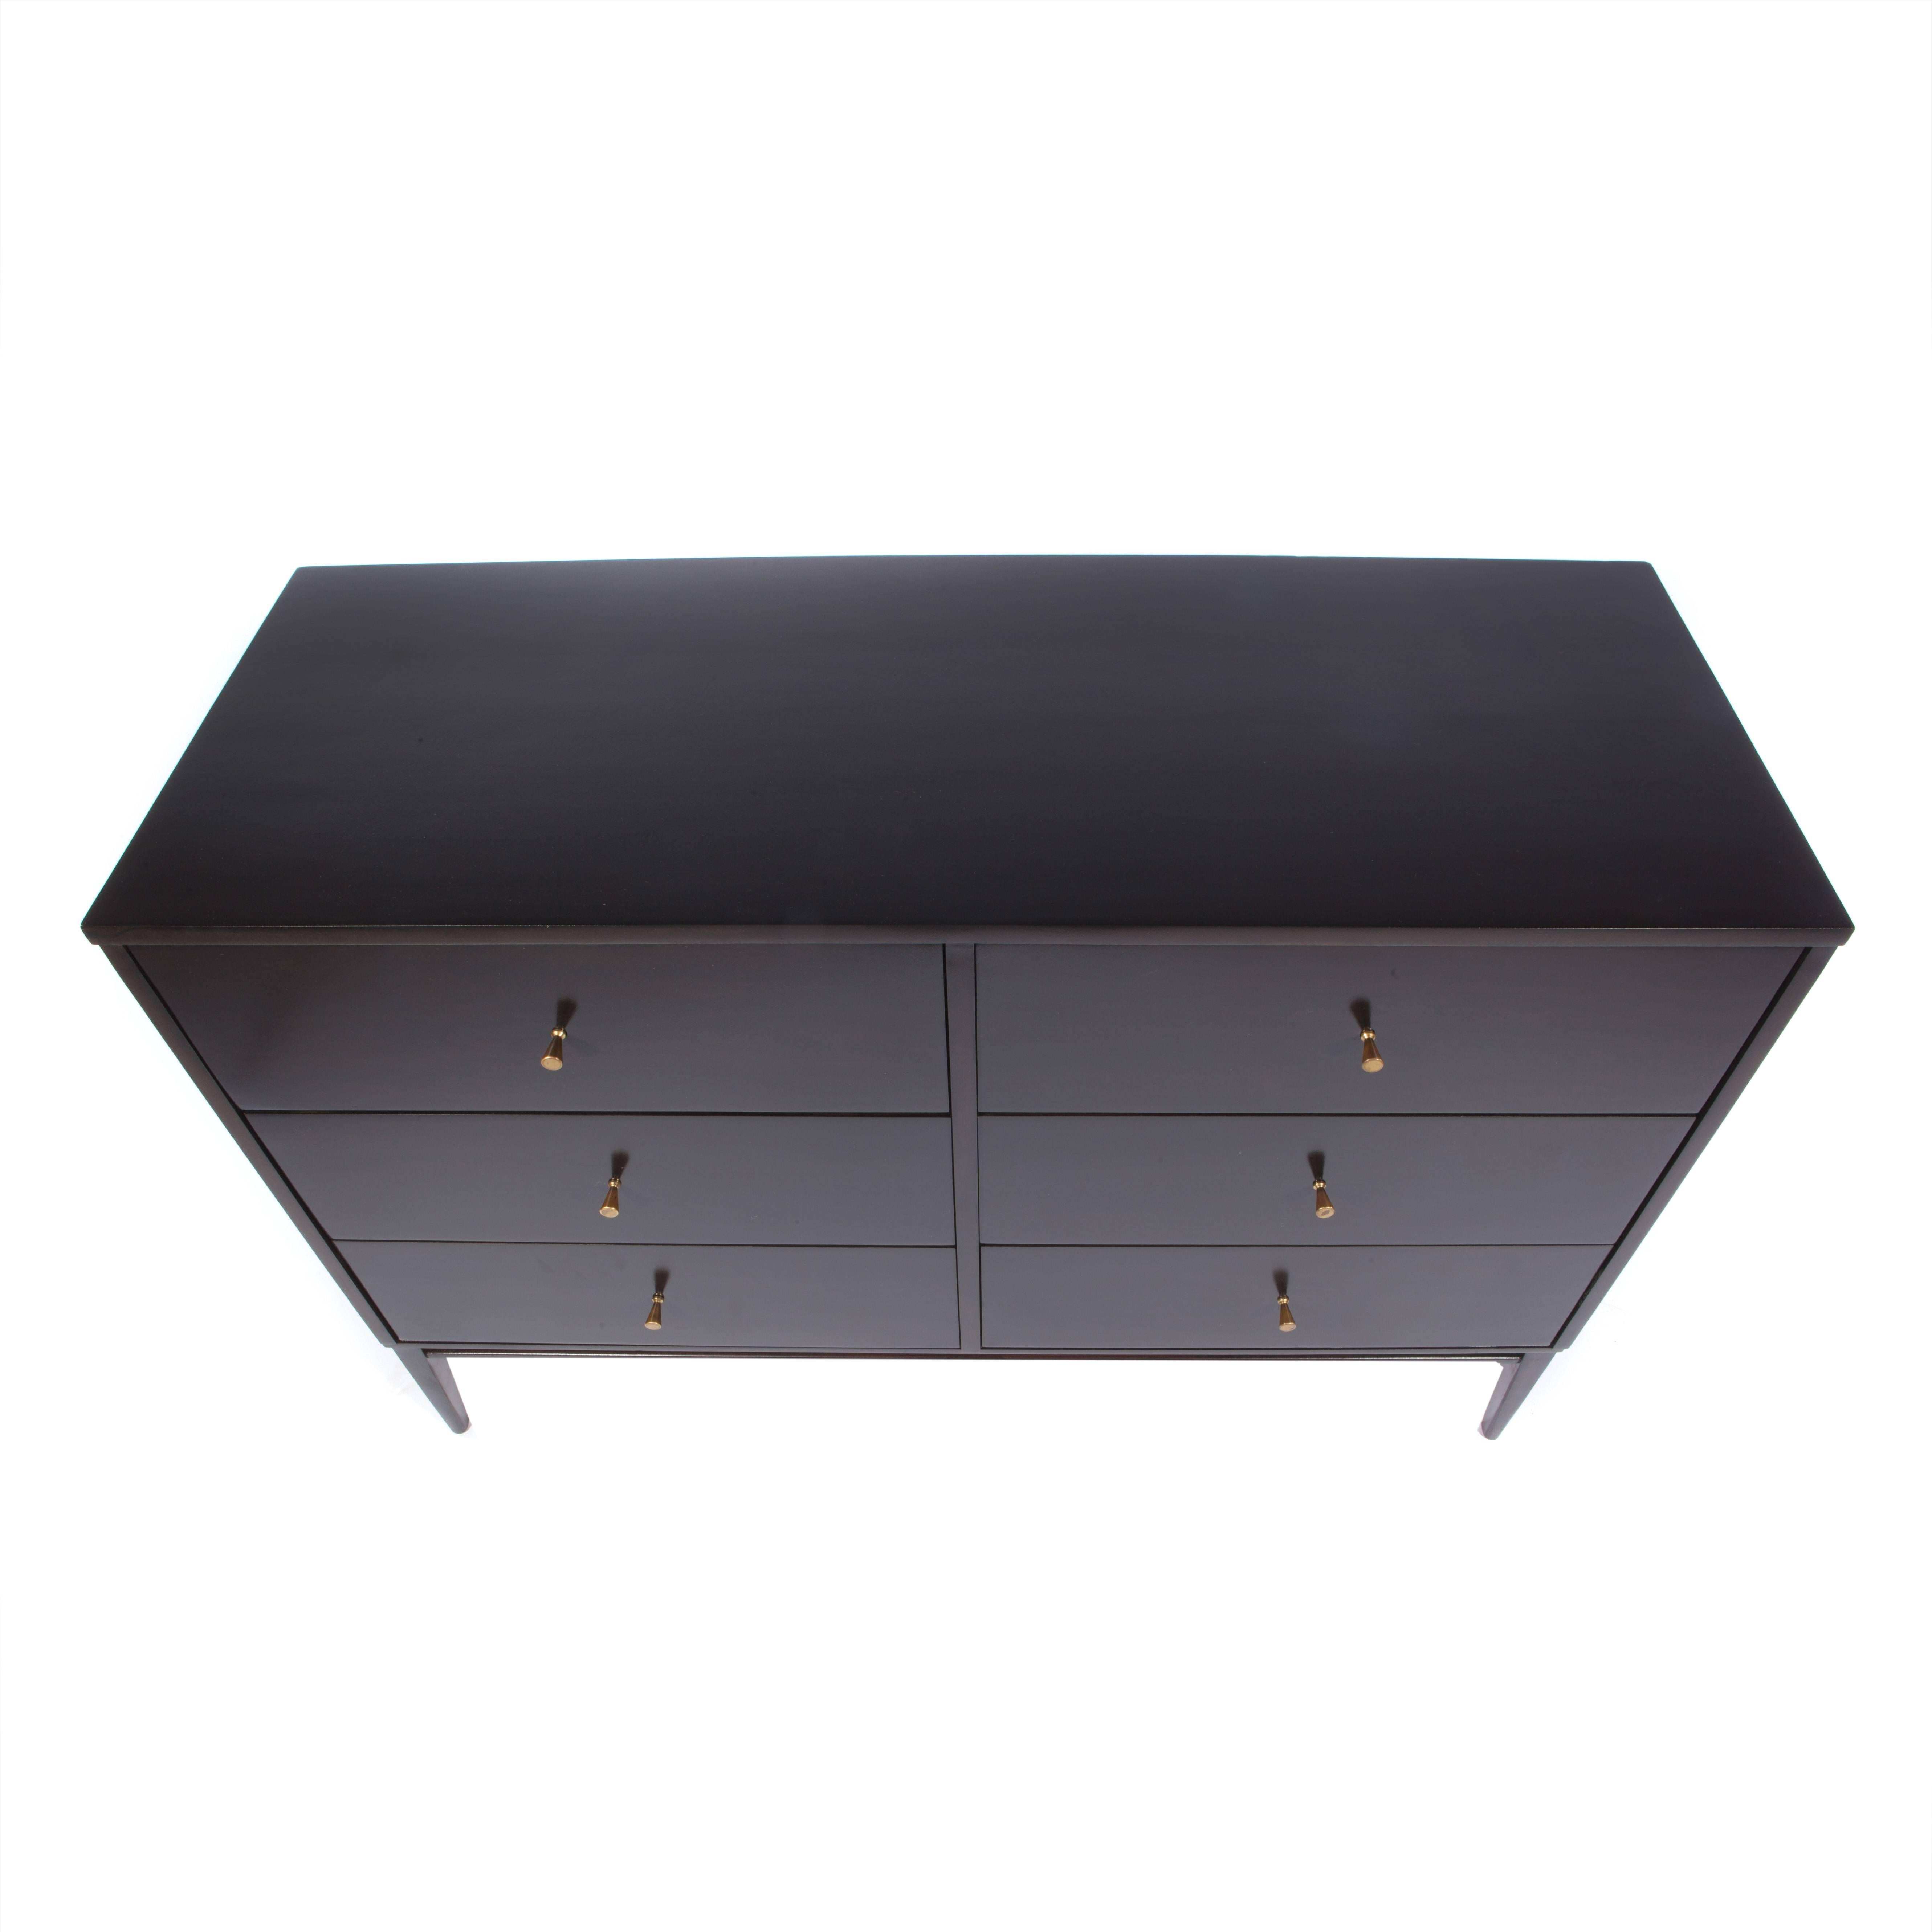 Six-drawer dresser supported by an elegantly tapered leg at each corner. Original conical brass pulls. The maple has been refinished in a hand-applied black satin lacquer. A bit of the woodgrain shows through this gorgeous finish. Foil 